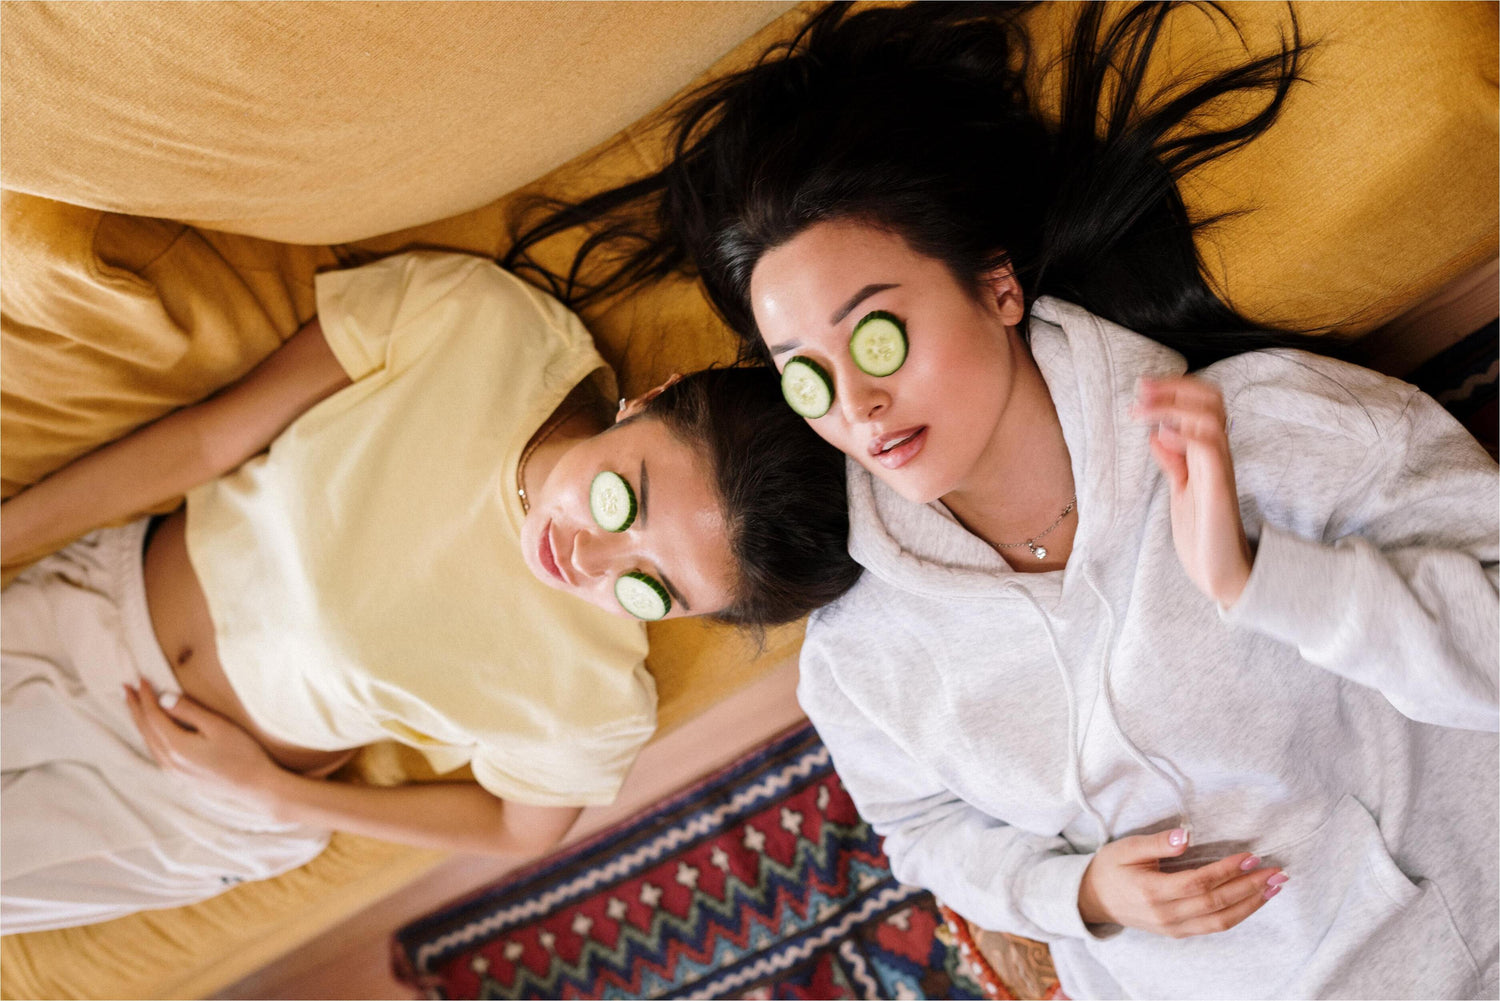 two women with cucumber's on their eyes laying on sofa